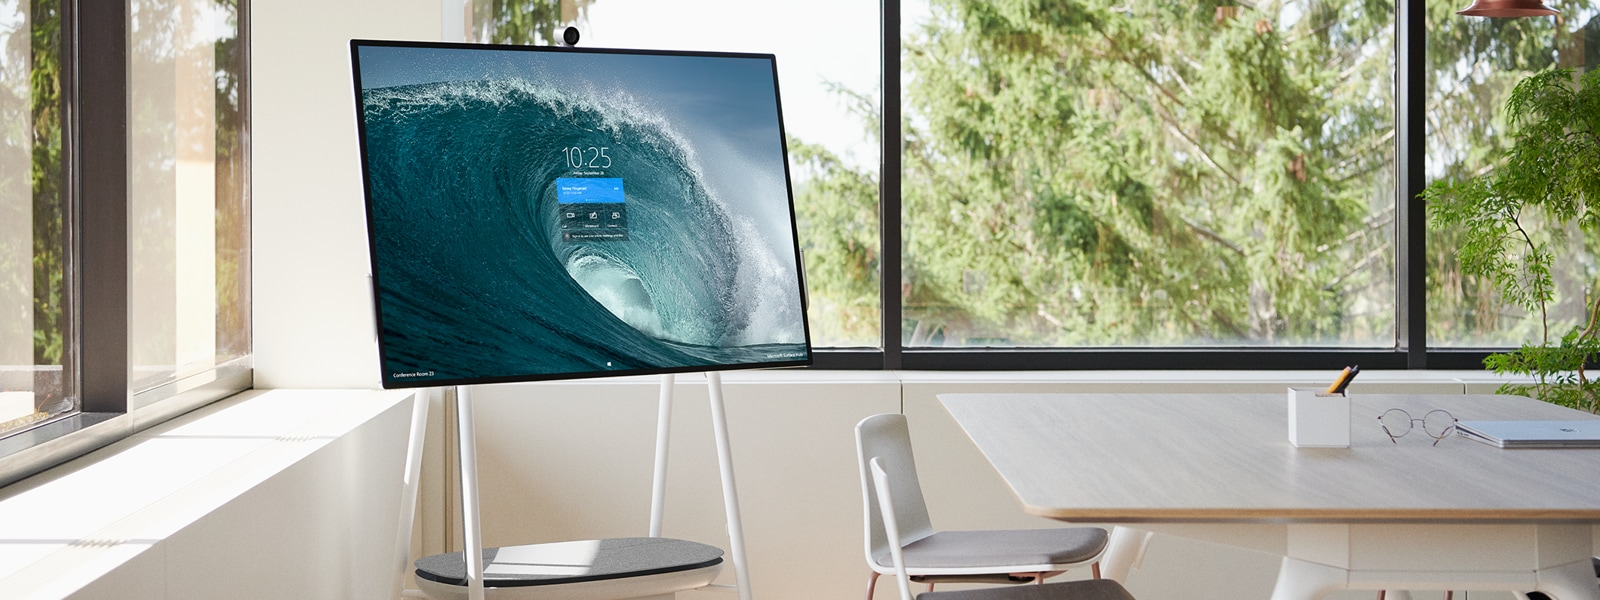 A Surface Hub 2 sits on a mobile stand and displays a start screen in a conference room.